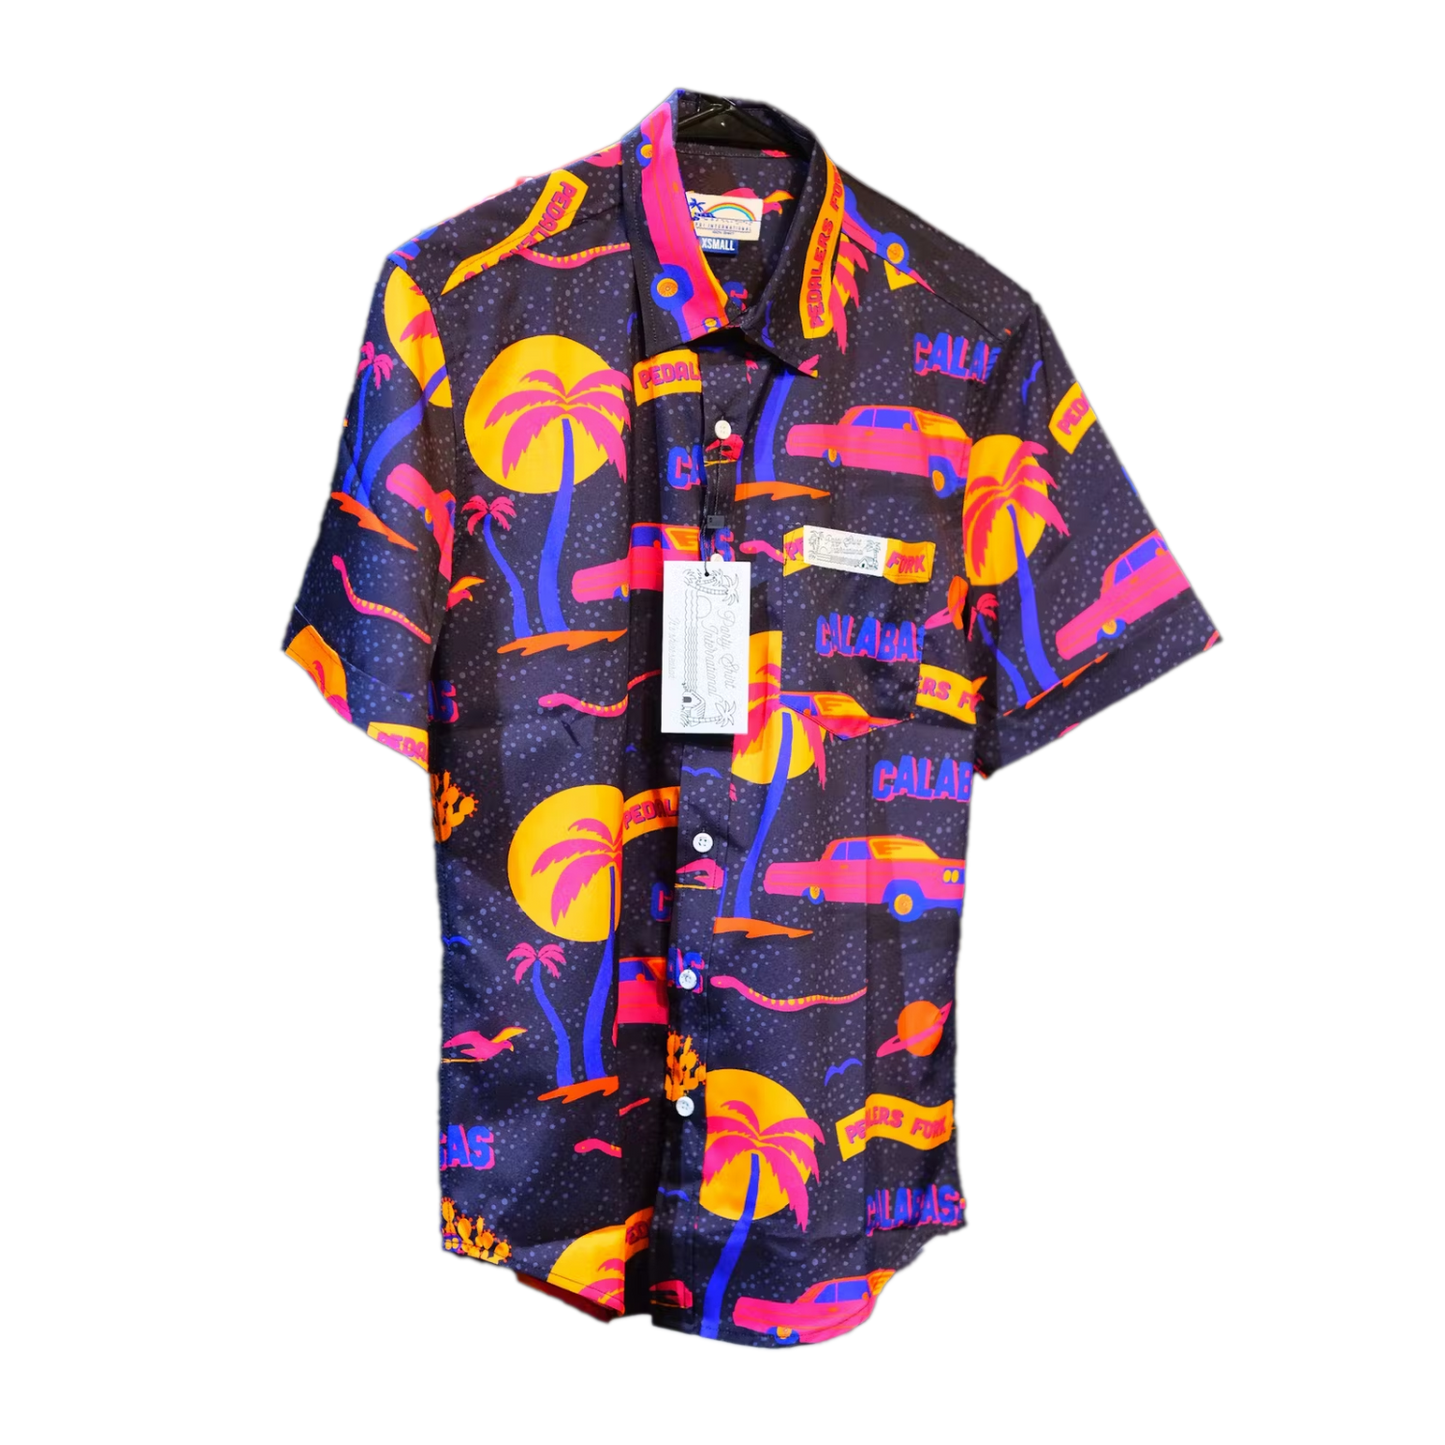 Party shirt with graphics of cars and palm trees